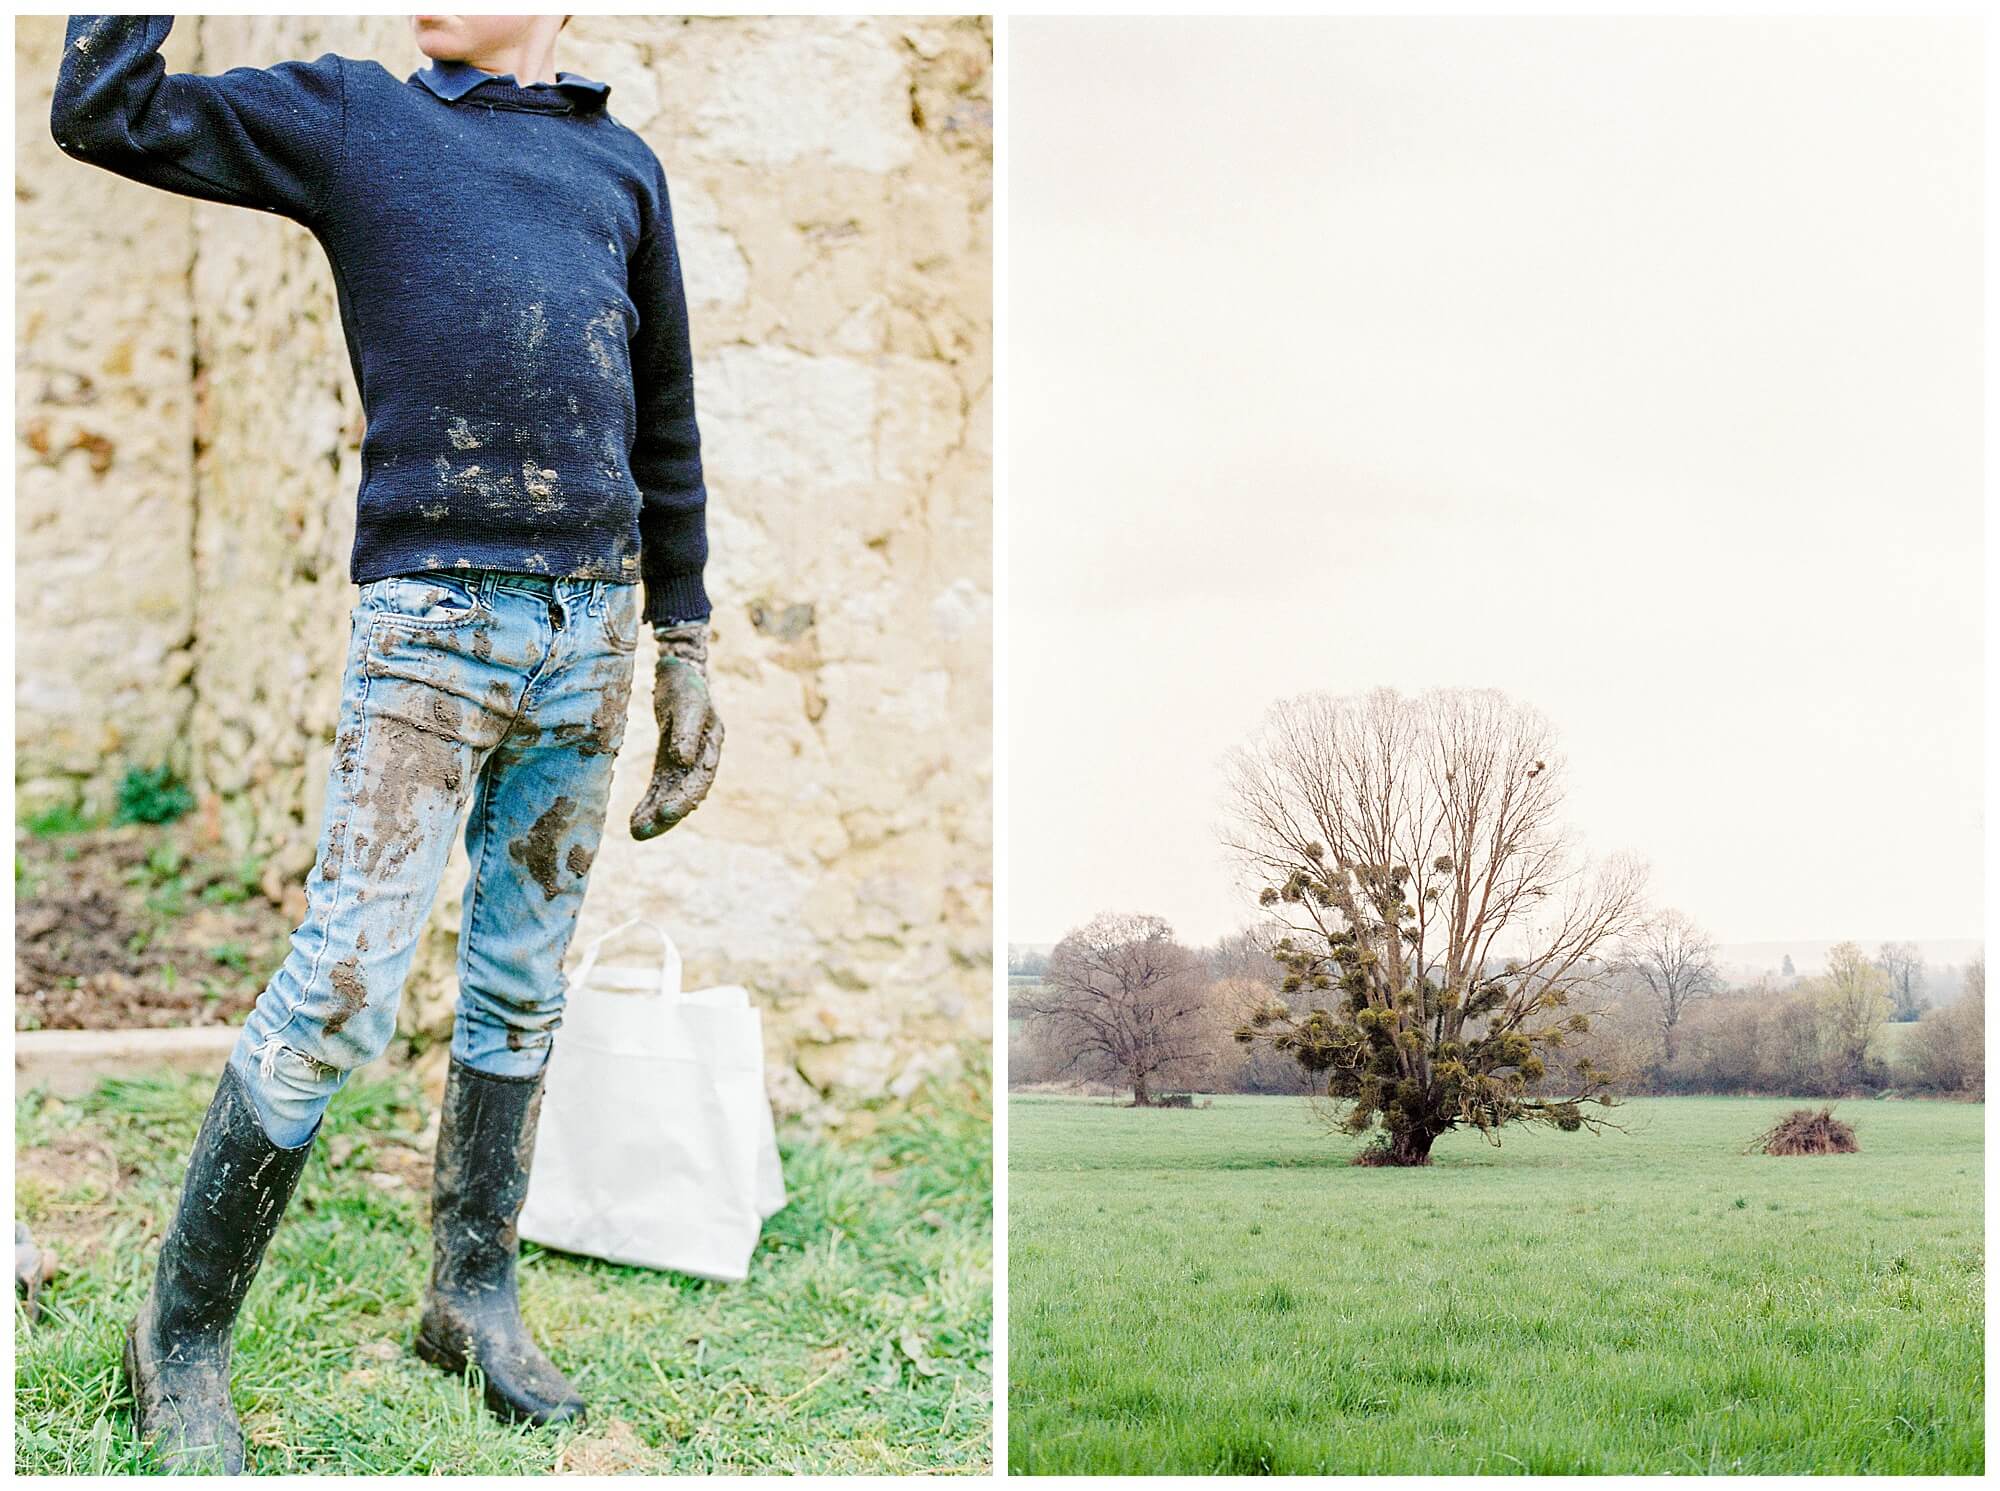 Left: The mud-splattered front of a young boy wearing a navy sweater, jeans, and rubber boots. Right: The bare willow tree in the large grassy field on a cold March morning. 